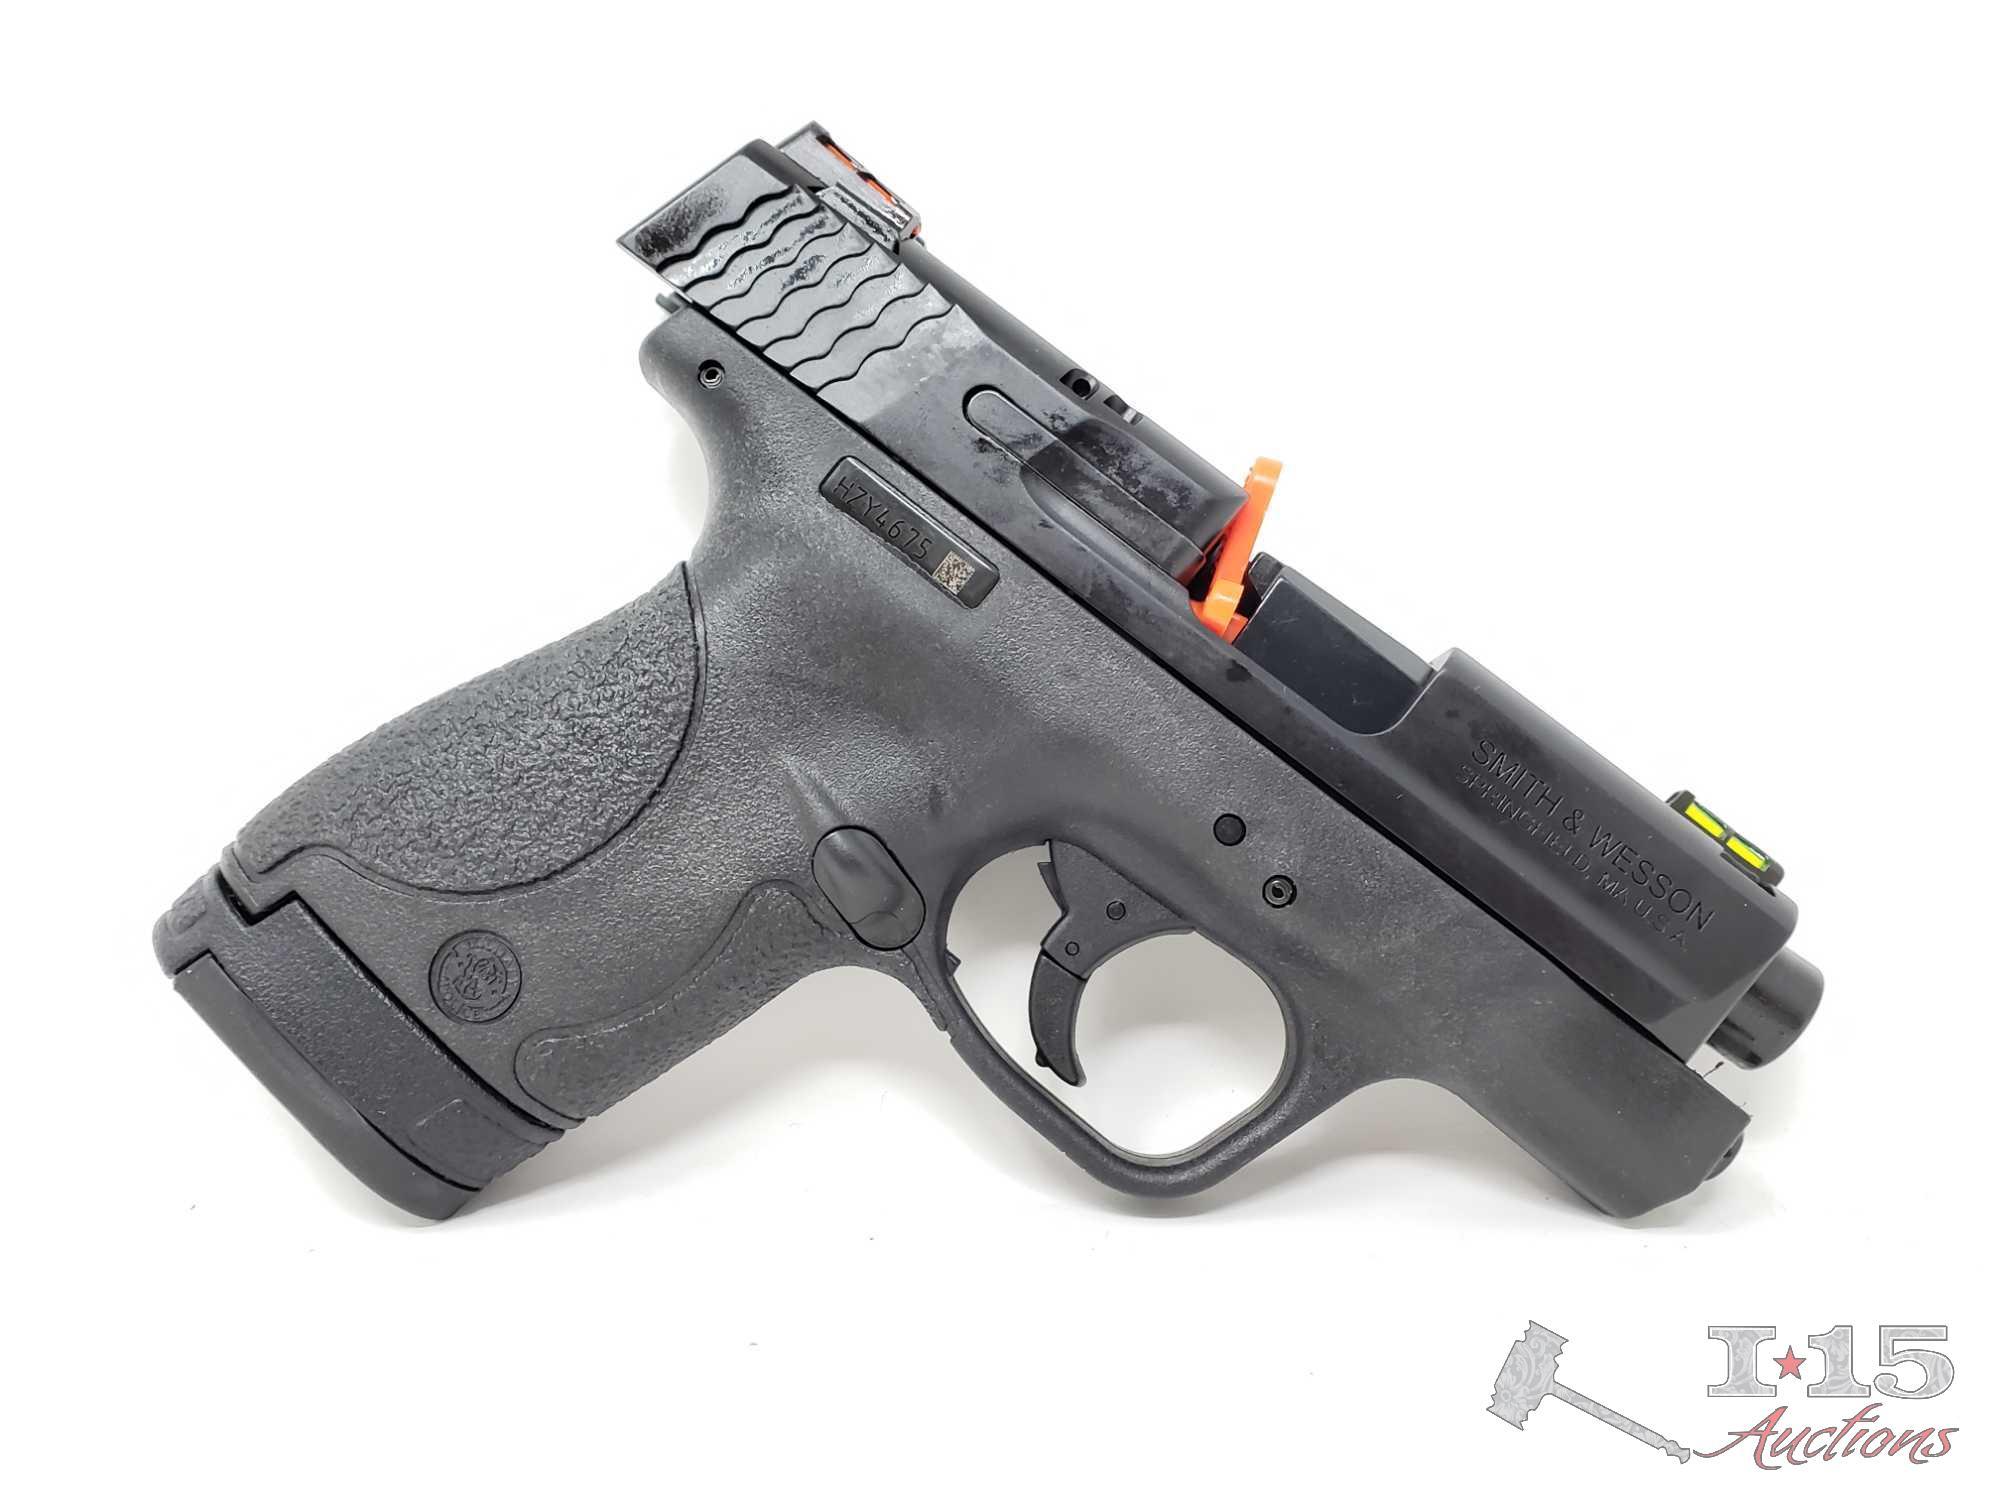 New, Smith & Wesson M&P 9 Shield 9mm